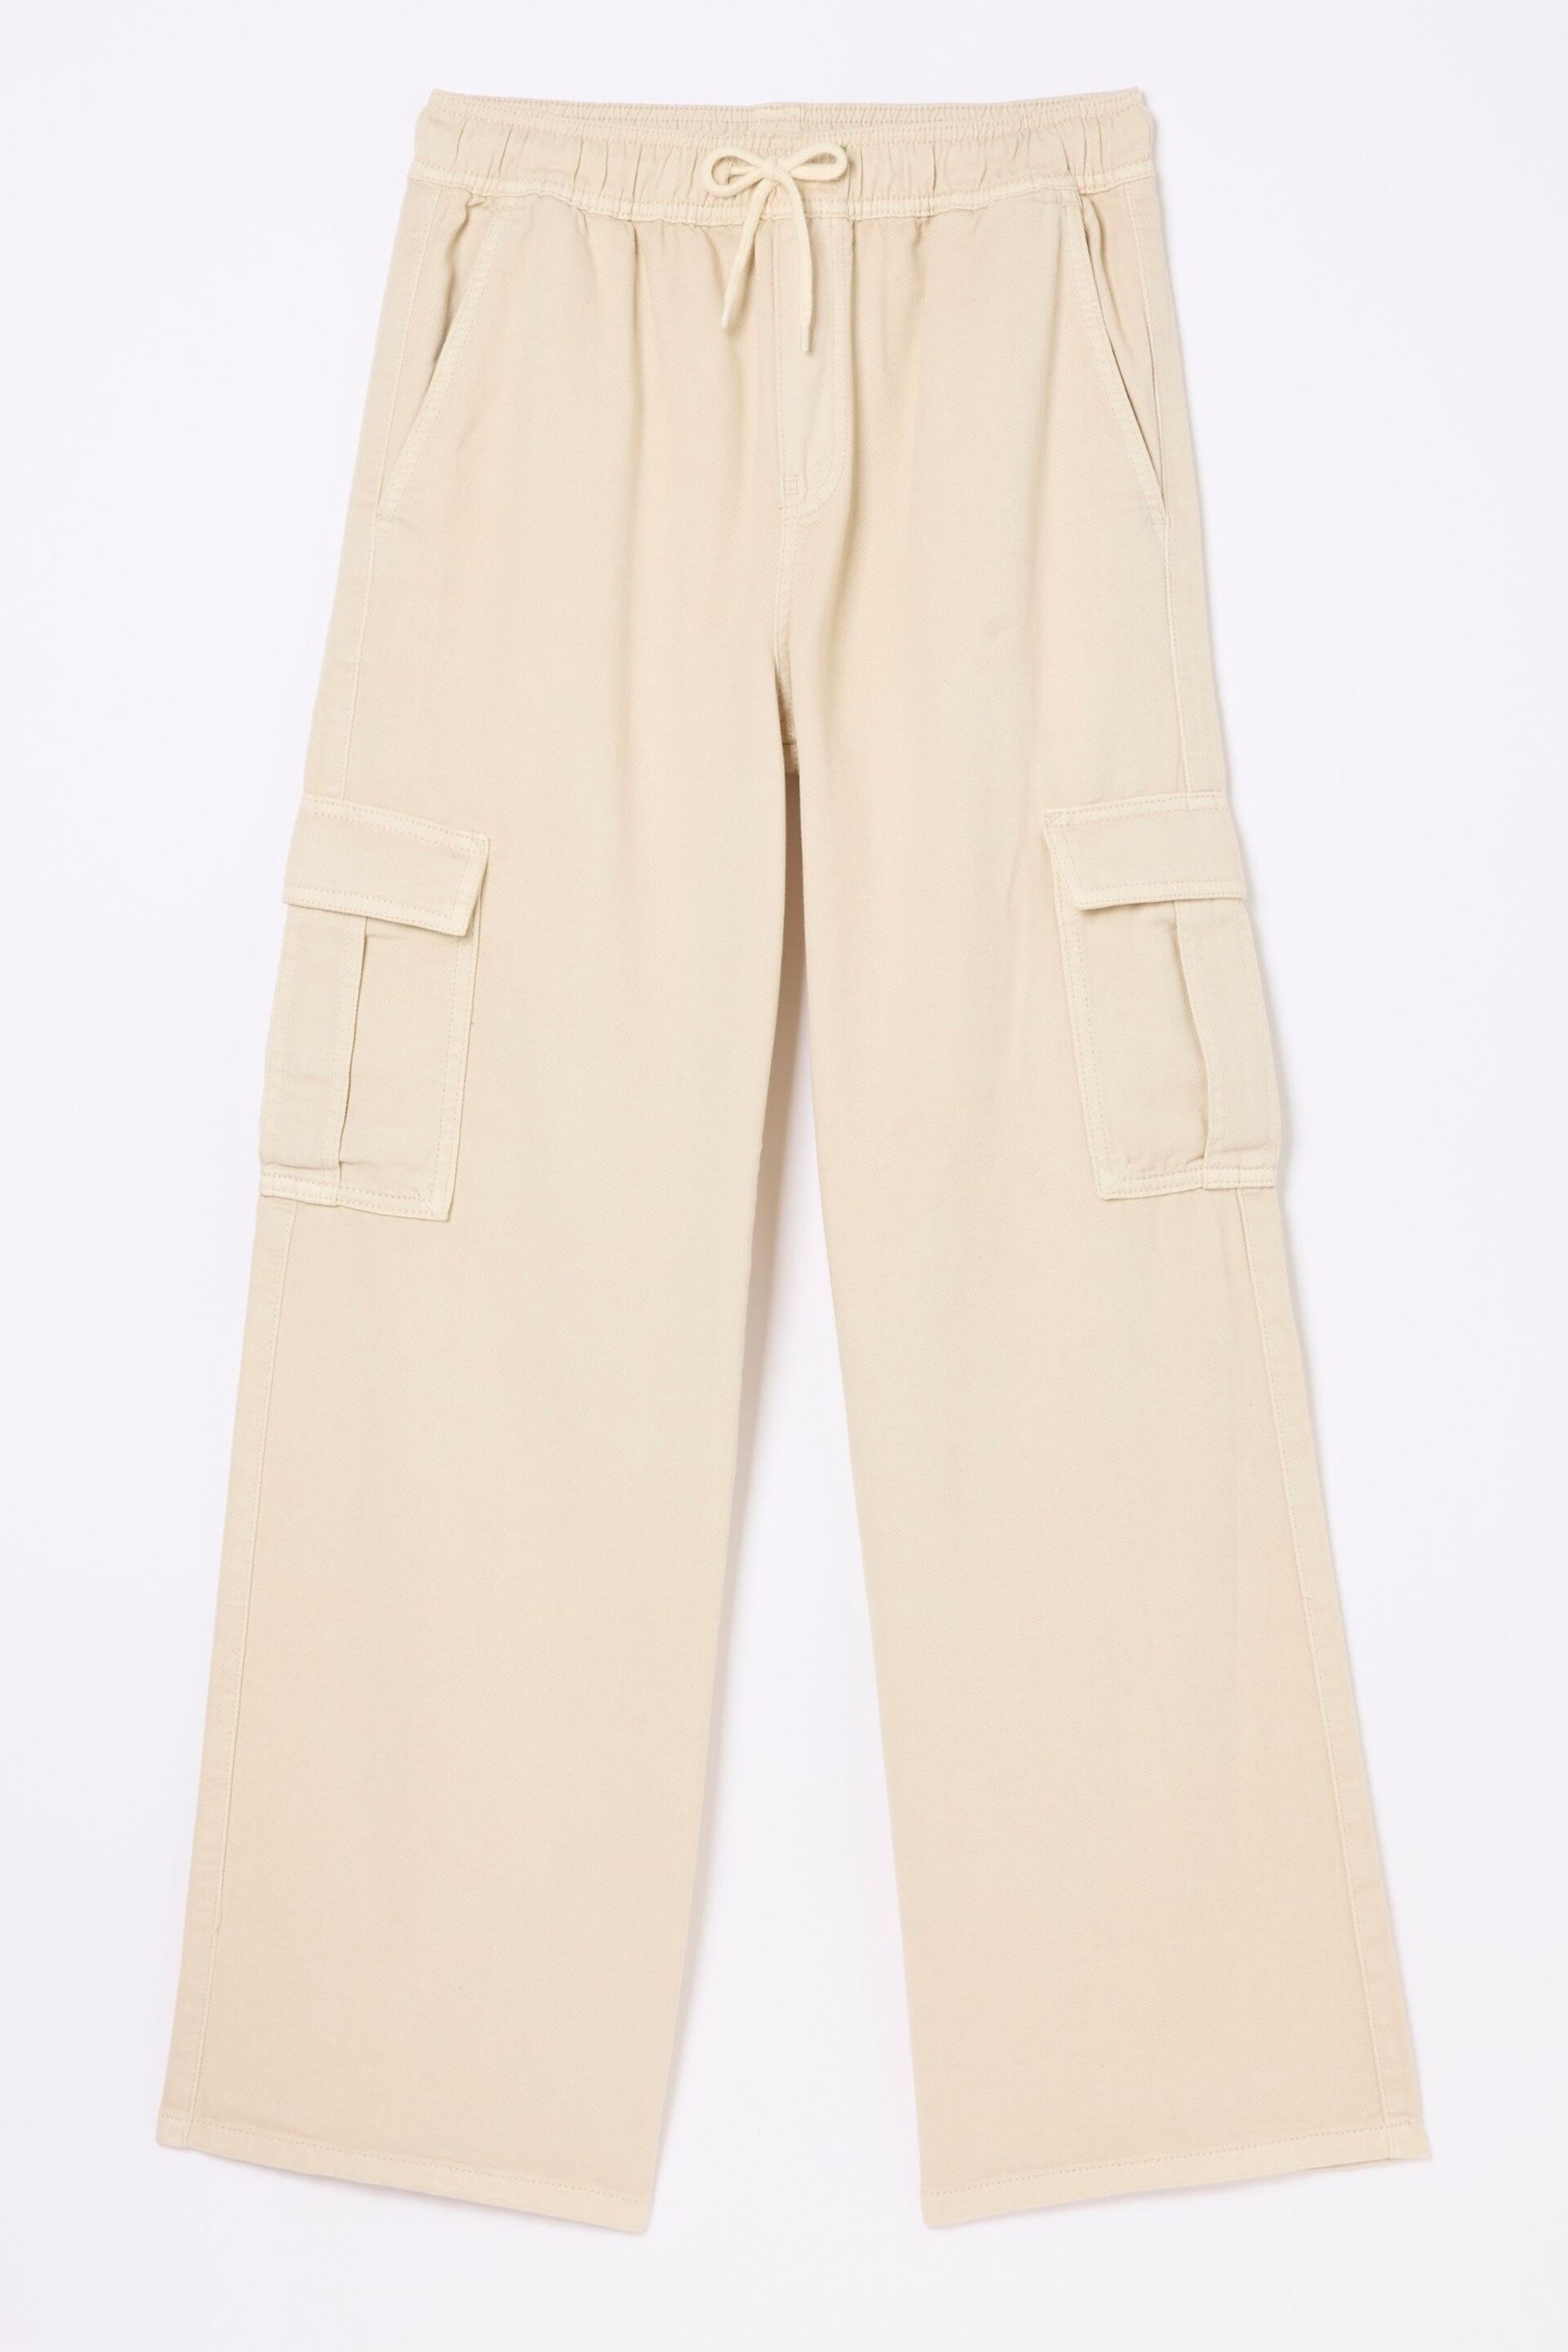 FatFace Natural Carter Cargo Wide Leg Jeans - Image 5 of 5